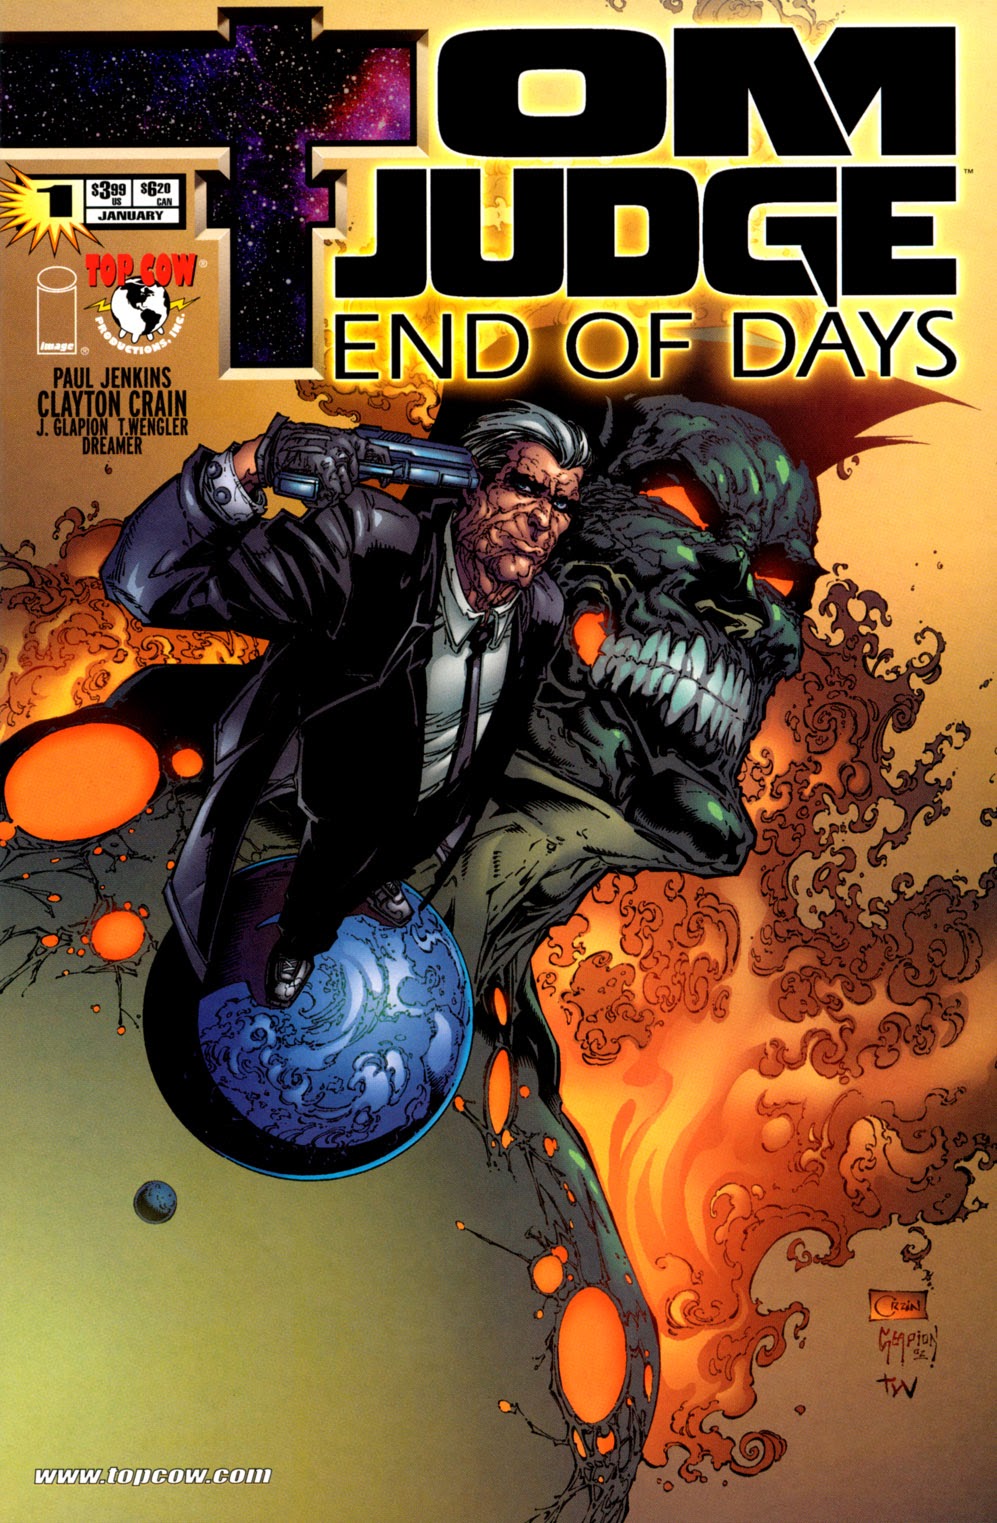 Read online Tom Judge: End of Days comic -  Issue # Full - 1